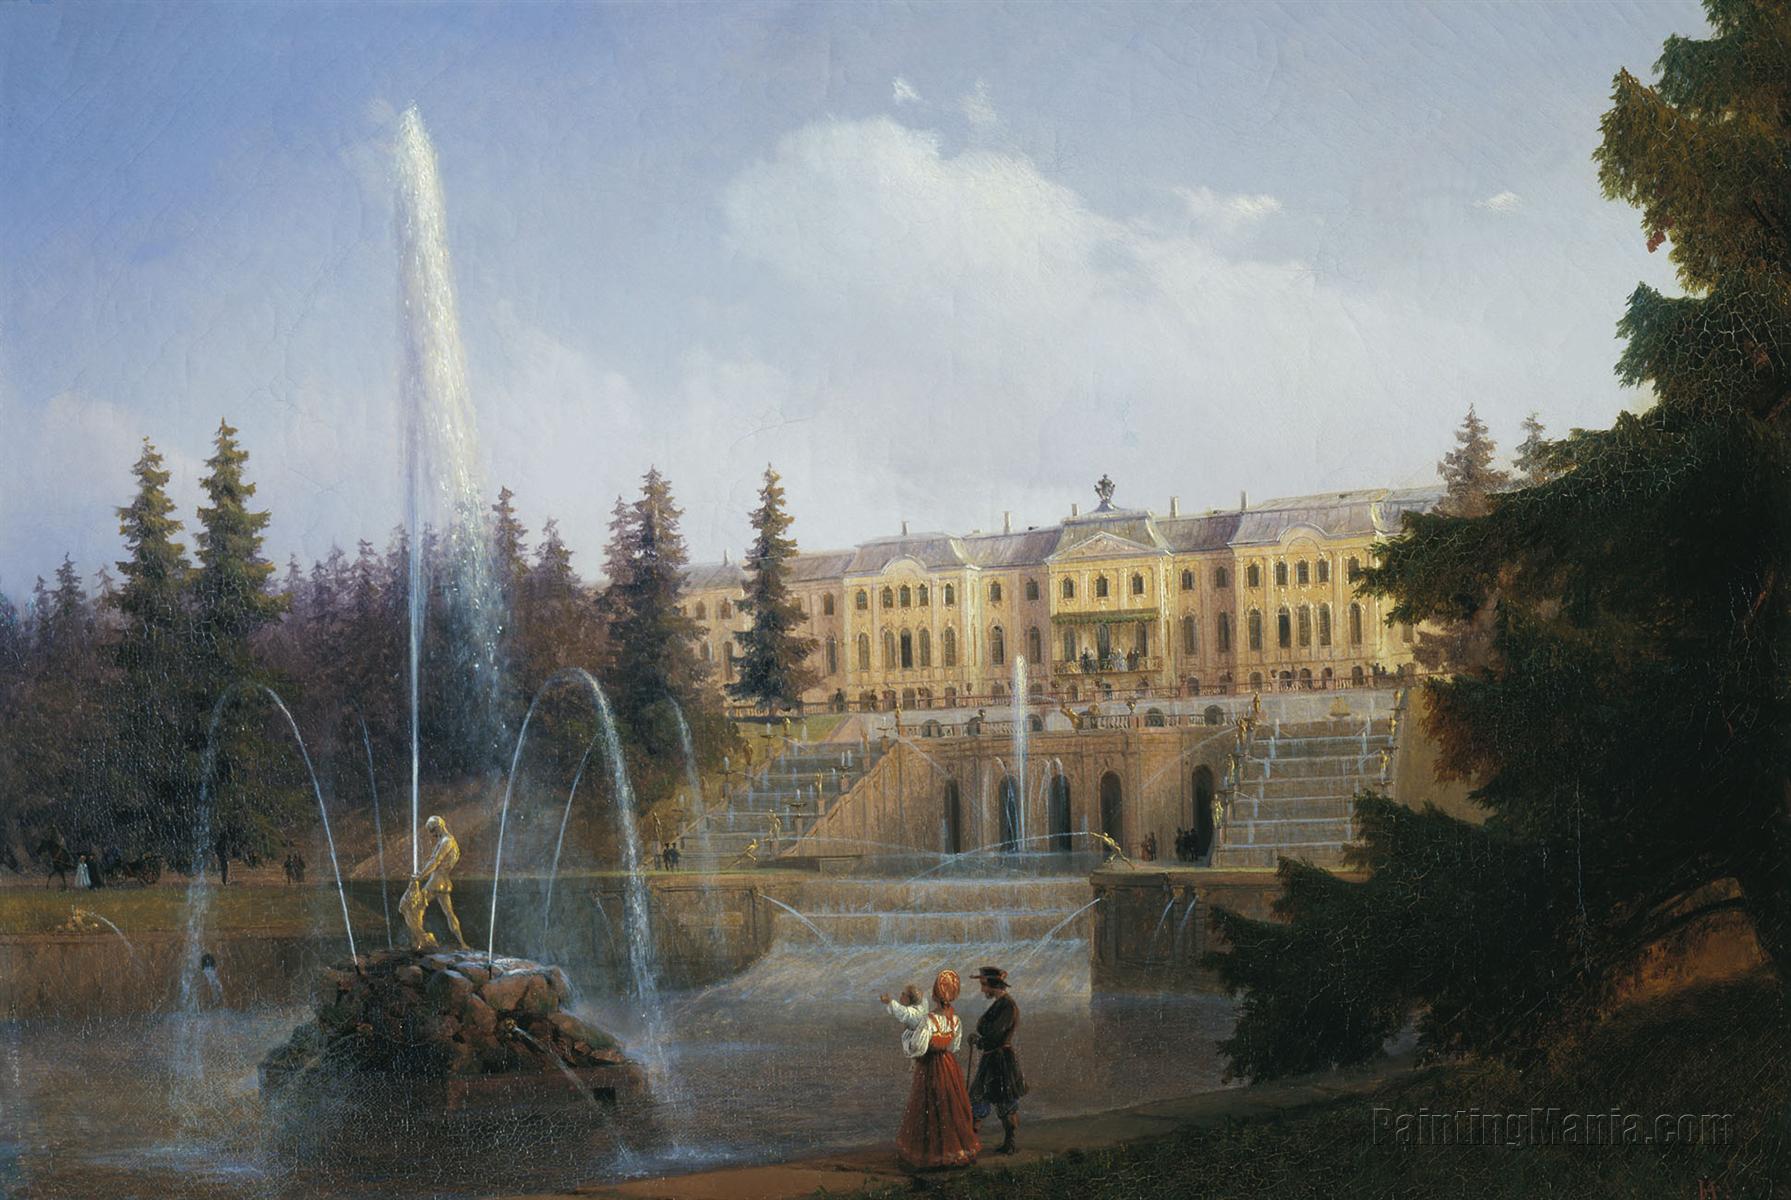 View of the Big Cascade in Petergof and the Great Palace of Petergof